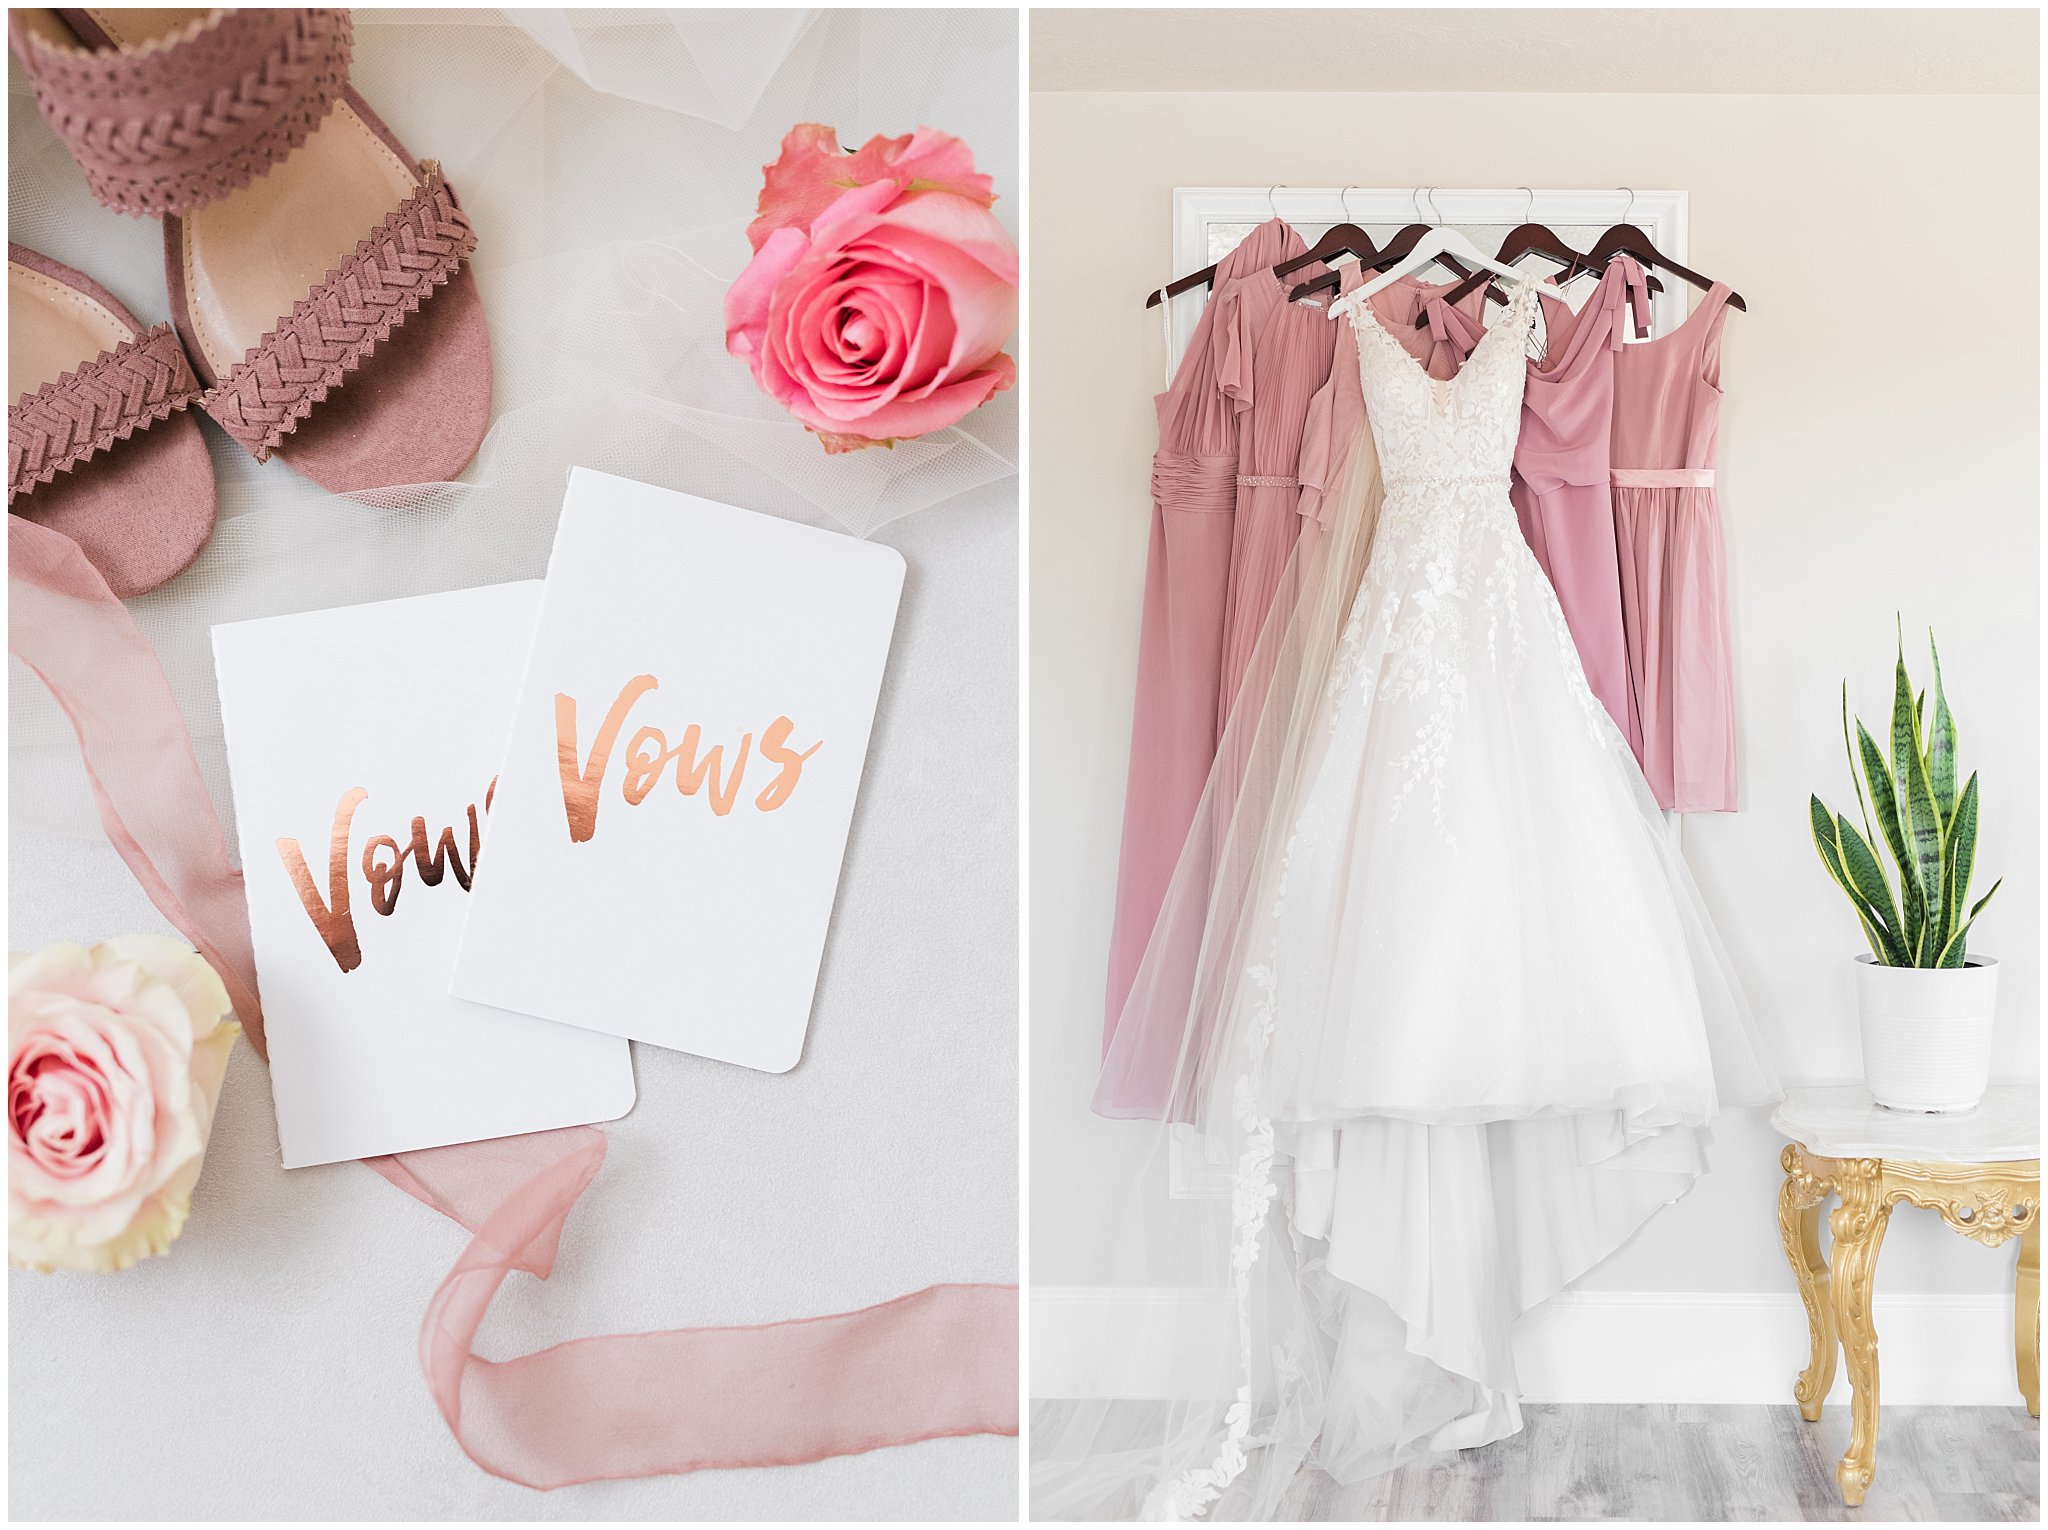 Dusty Rose bridesmaid dresses hanging with wedding dress and rose gold vow books | Oak Hills Utah Dusty Rose and Gray Summer Wedding | Jessie and Dallin Photography